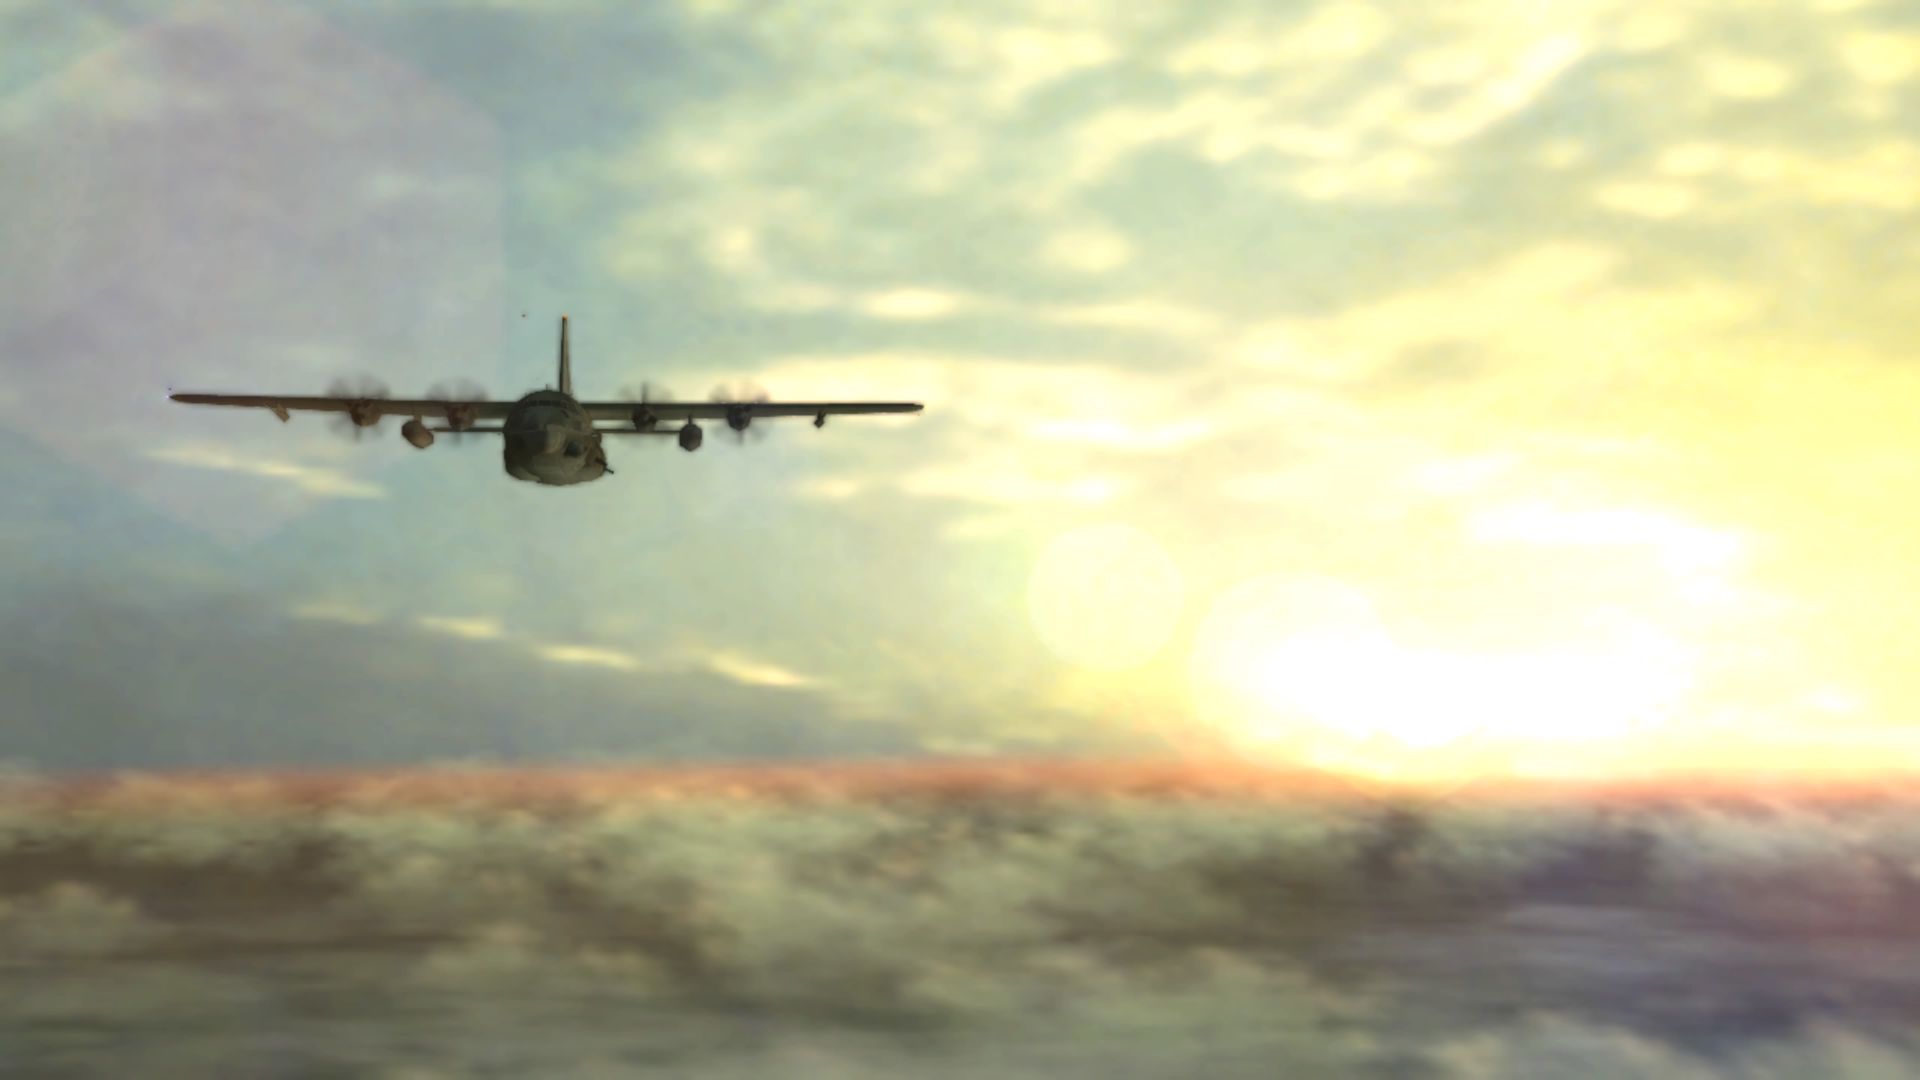 Screenshot from Metal Gear Solid 3 from the Master Collection Vol. 1 shows a large airplane flying over the cloudline with a sunrise behind it.